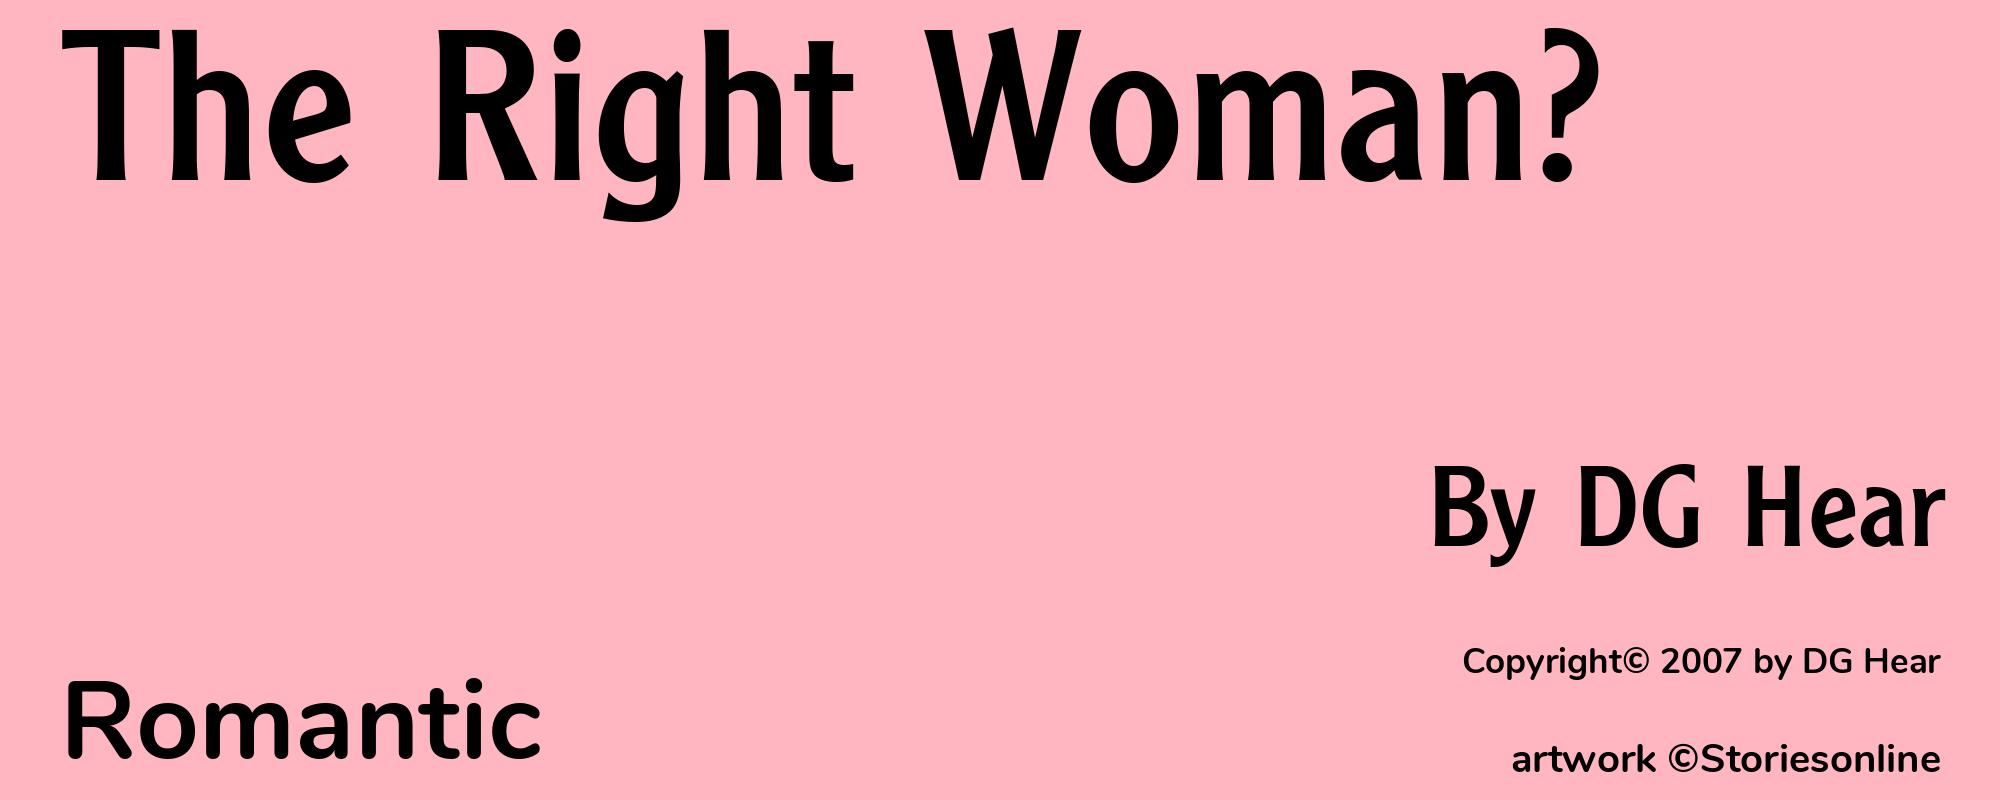 The Right Woman? - Cover